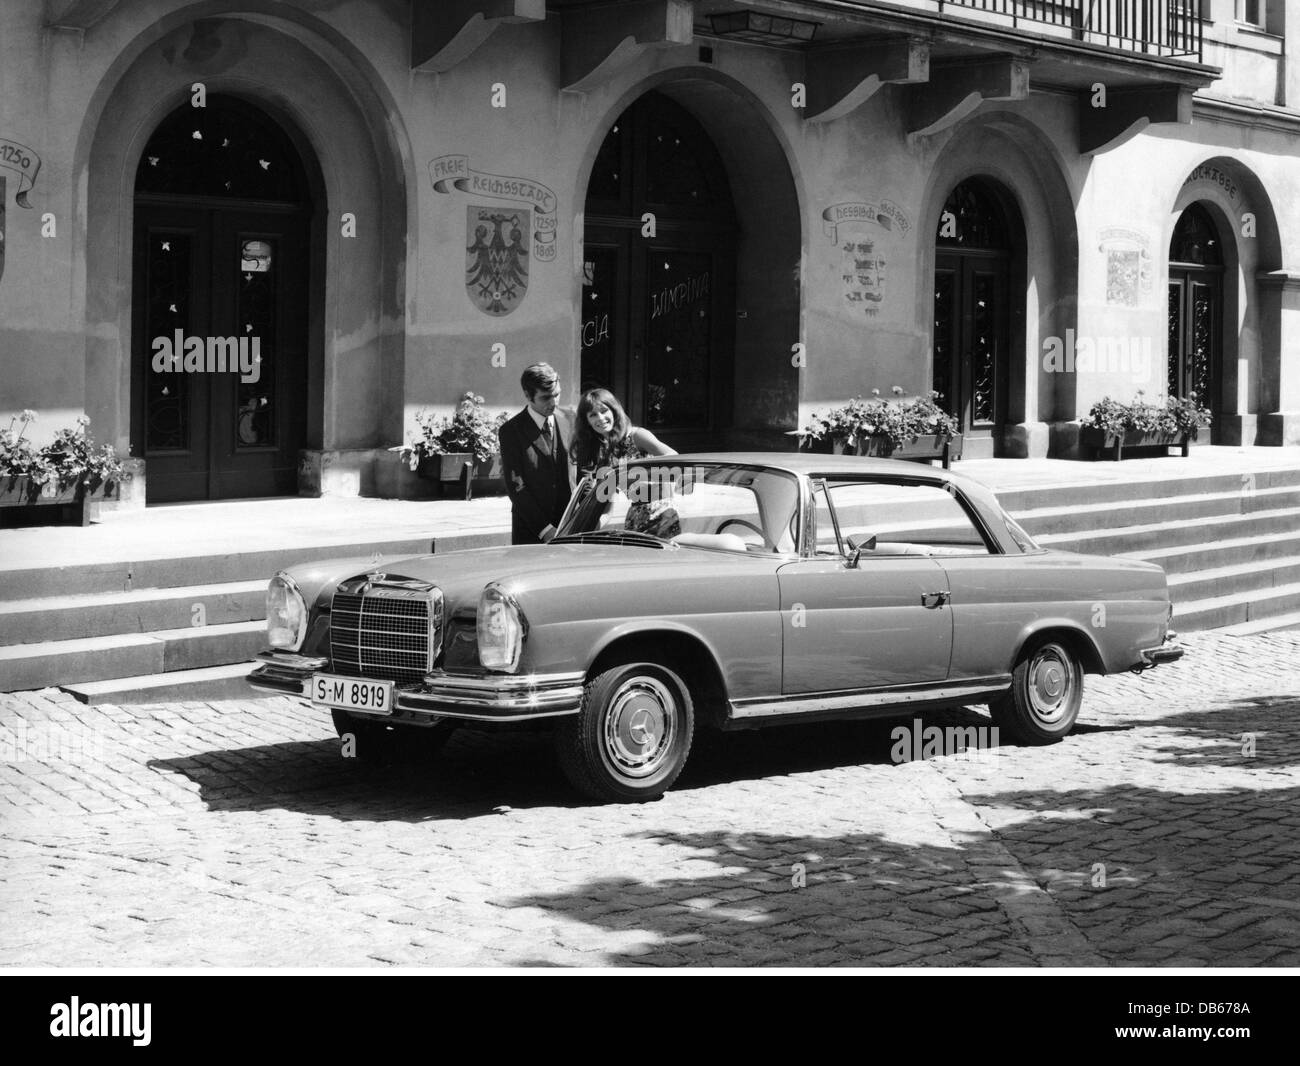 transport / transportation, cars, Mercedes-Benz 280 SE coupe, 1960s, Additional-Rights-Clearences-Not Available Stock Photo